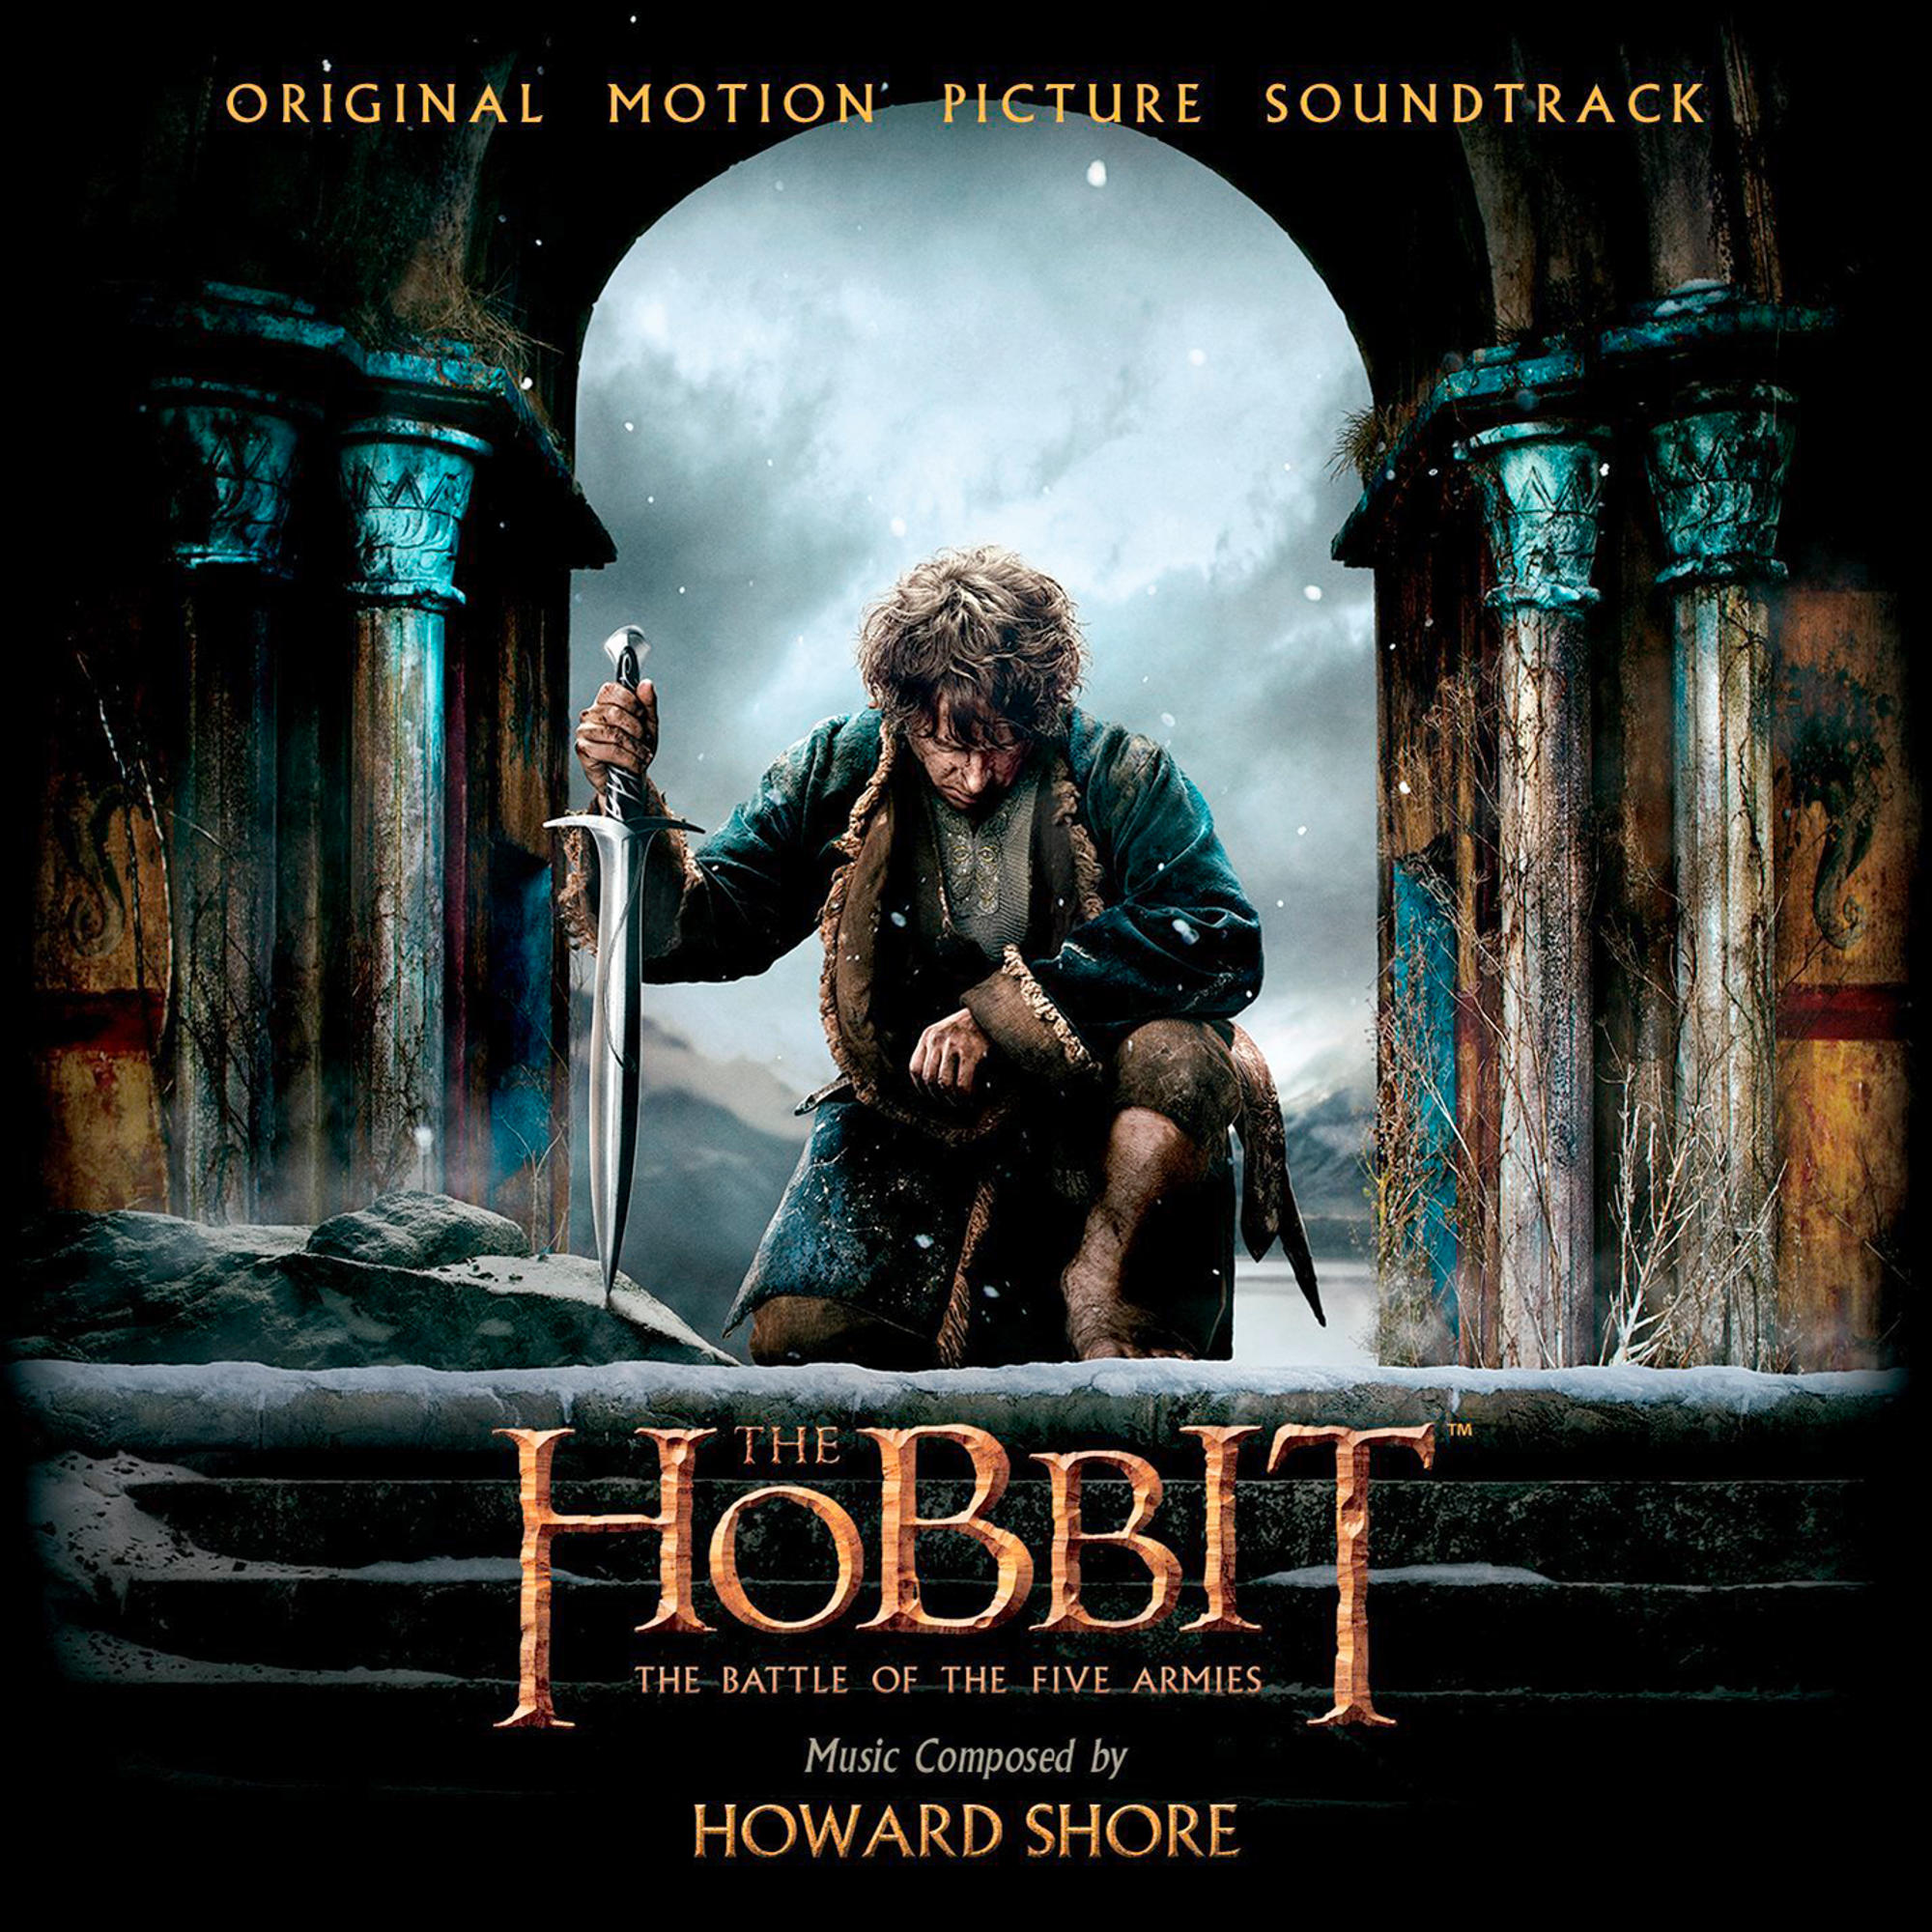 Battle - (CD) Howard Shore Armies The Five Of The - The Hobbit: